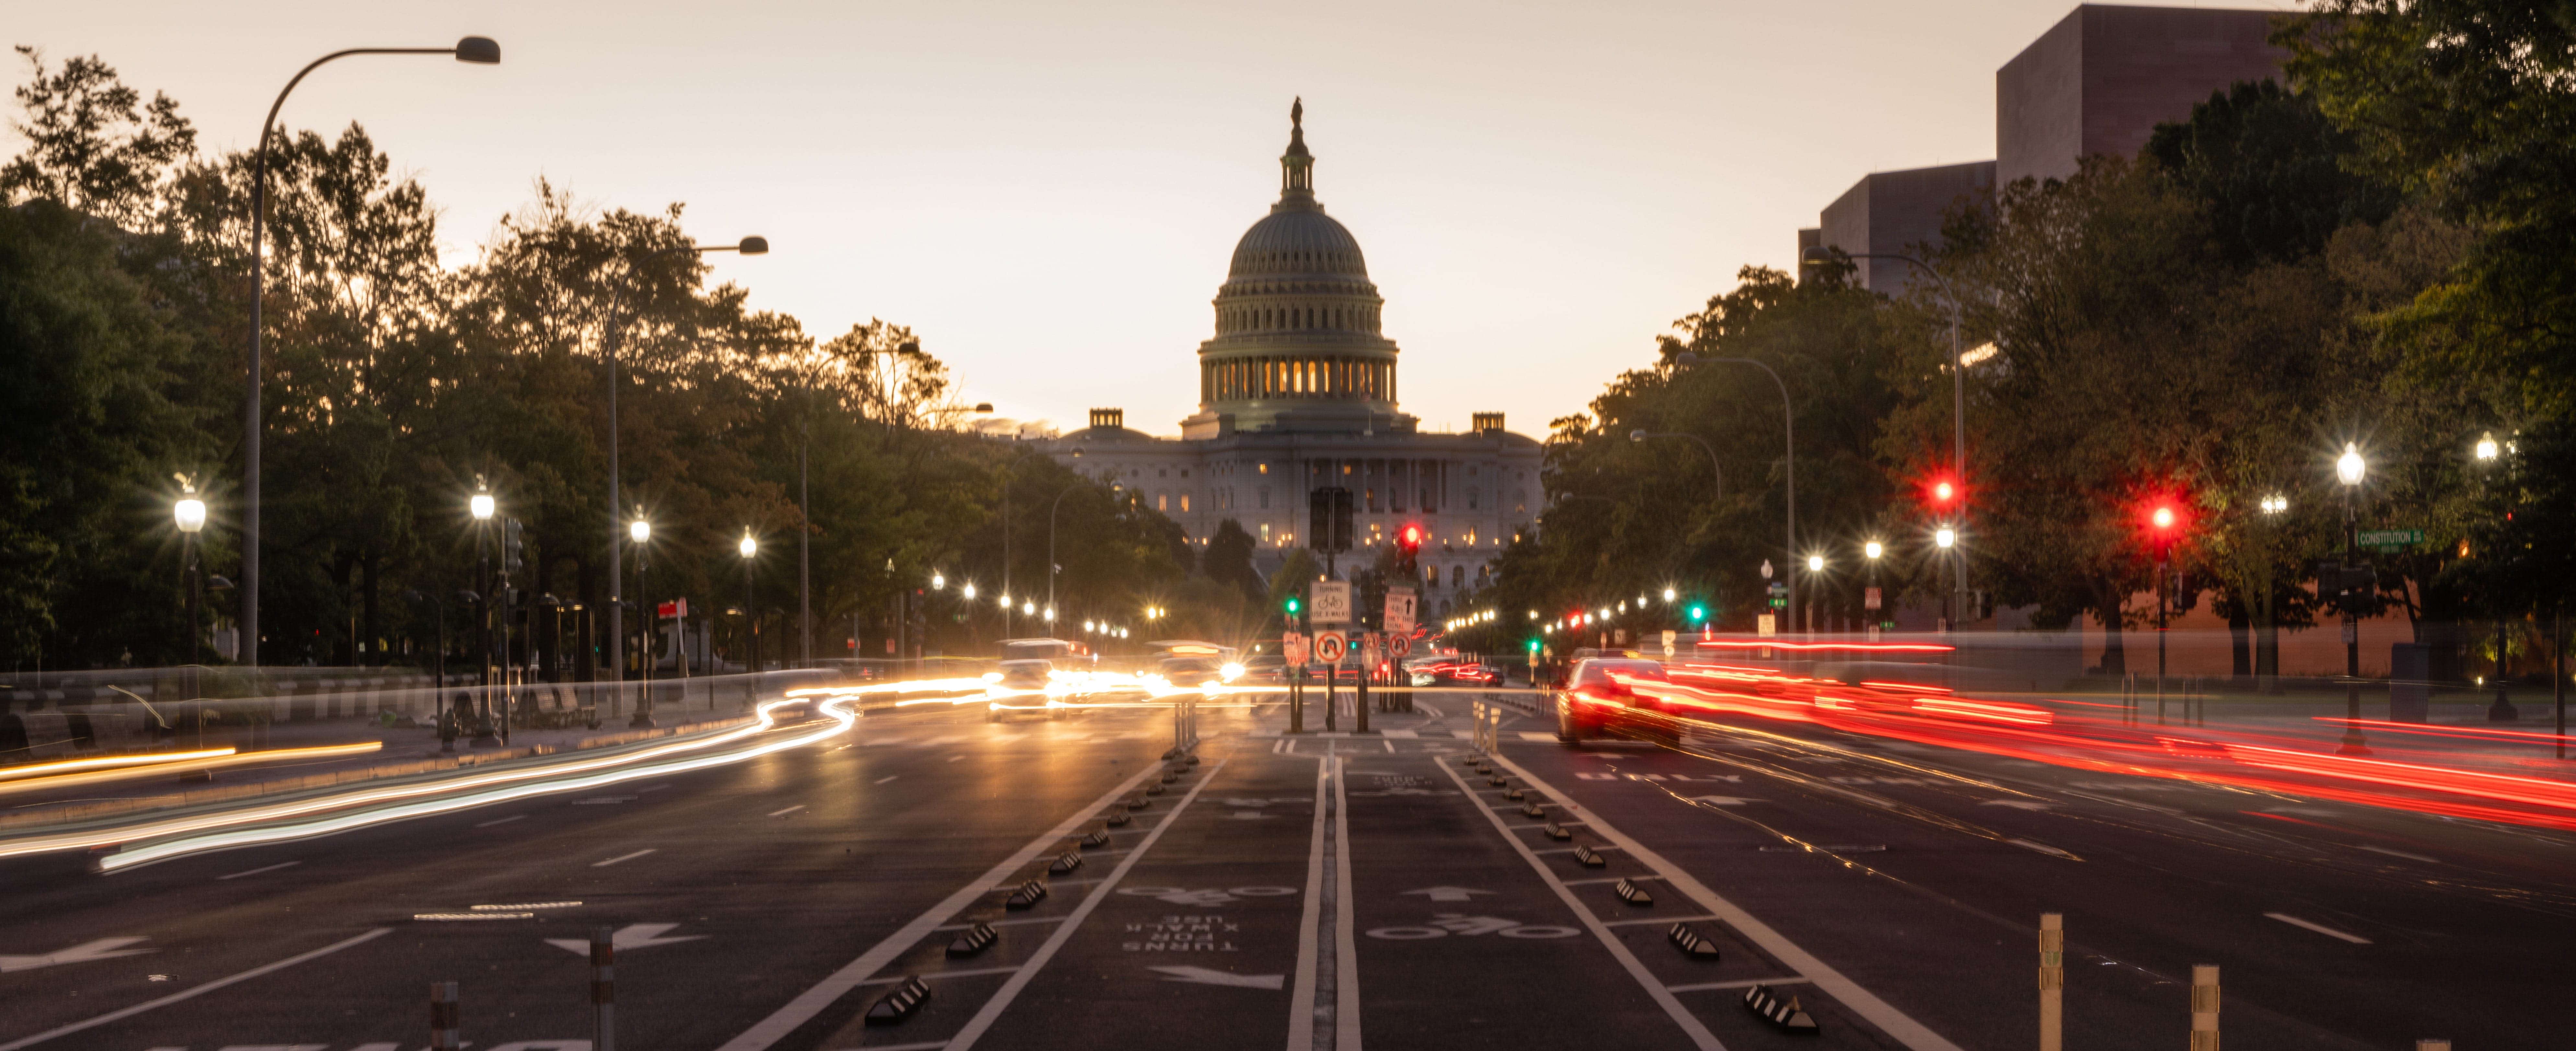 Early Morning Traffic Pennsylvania Avenue District of Columbia National Capital